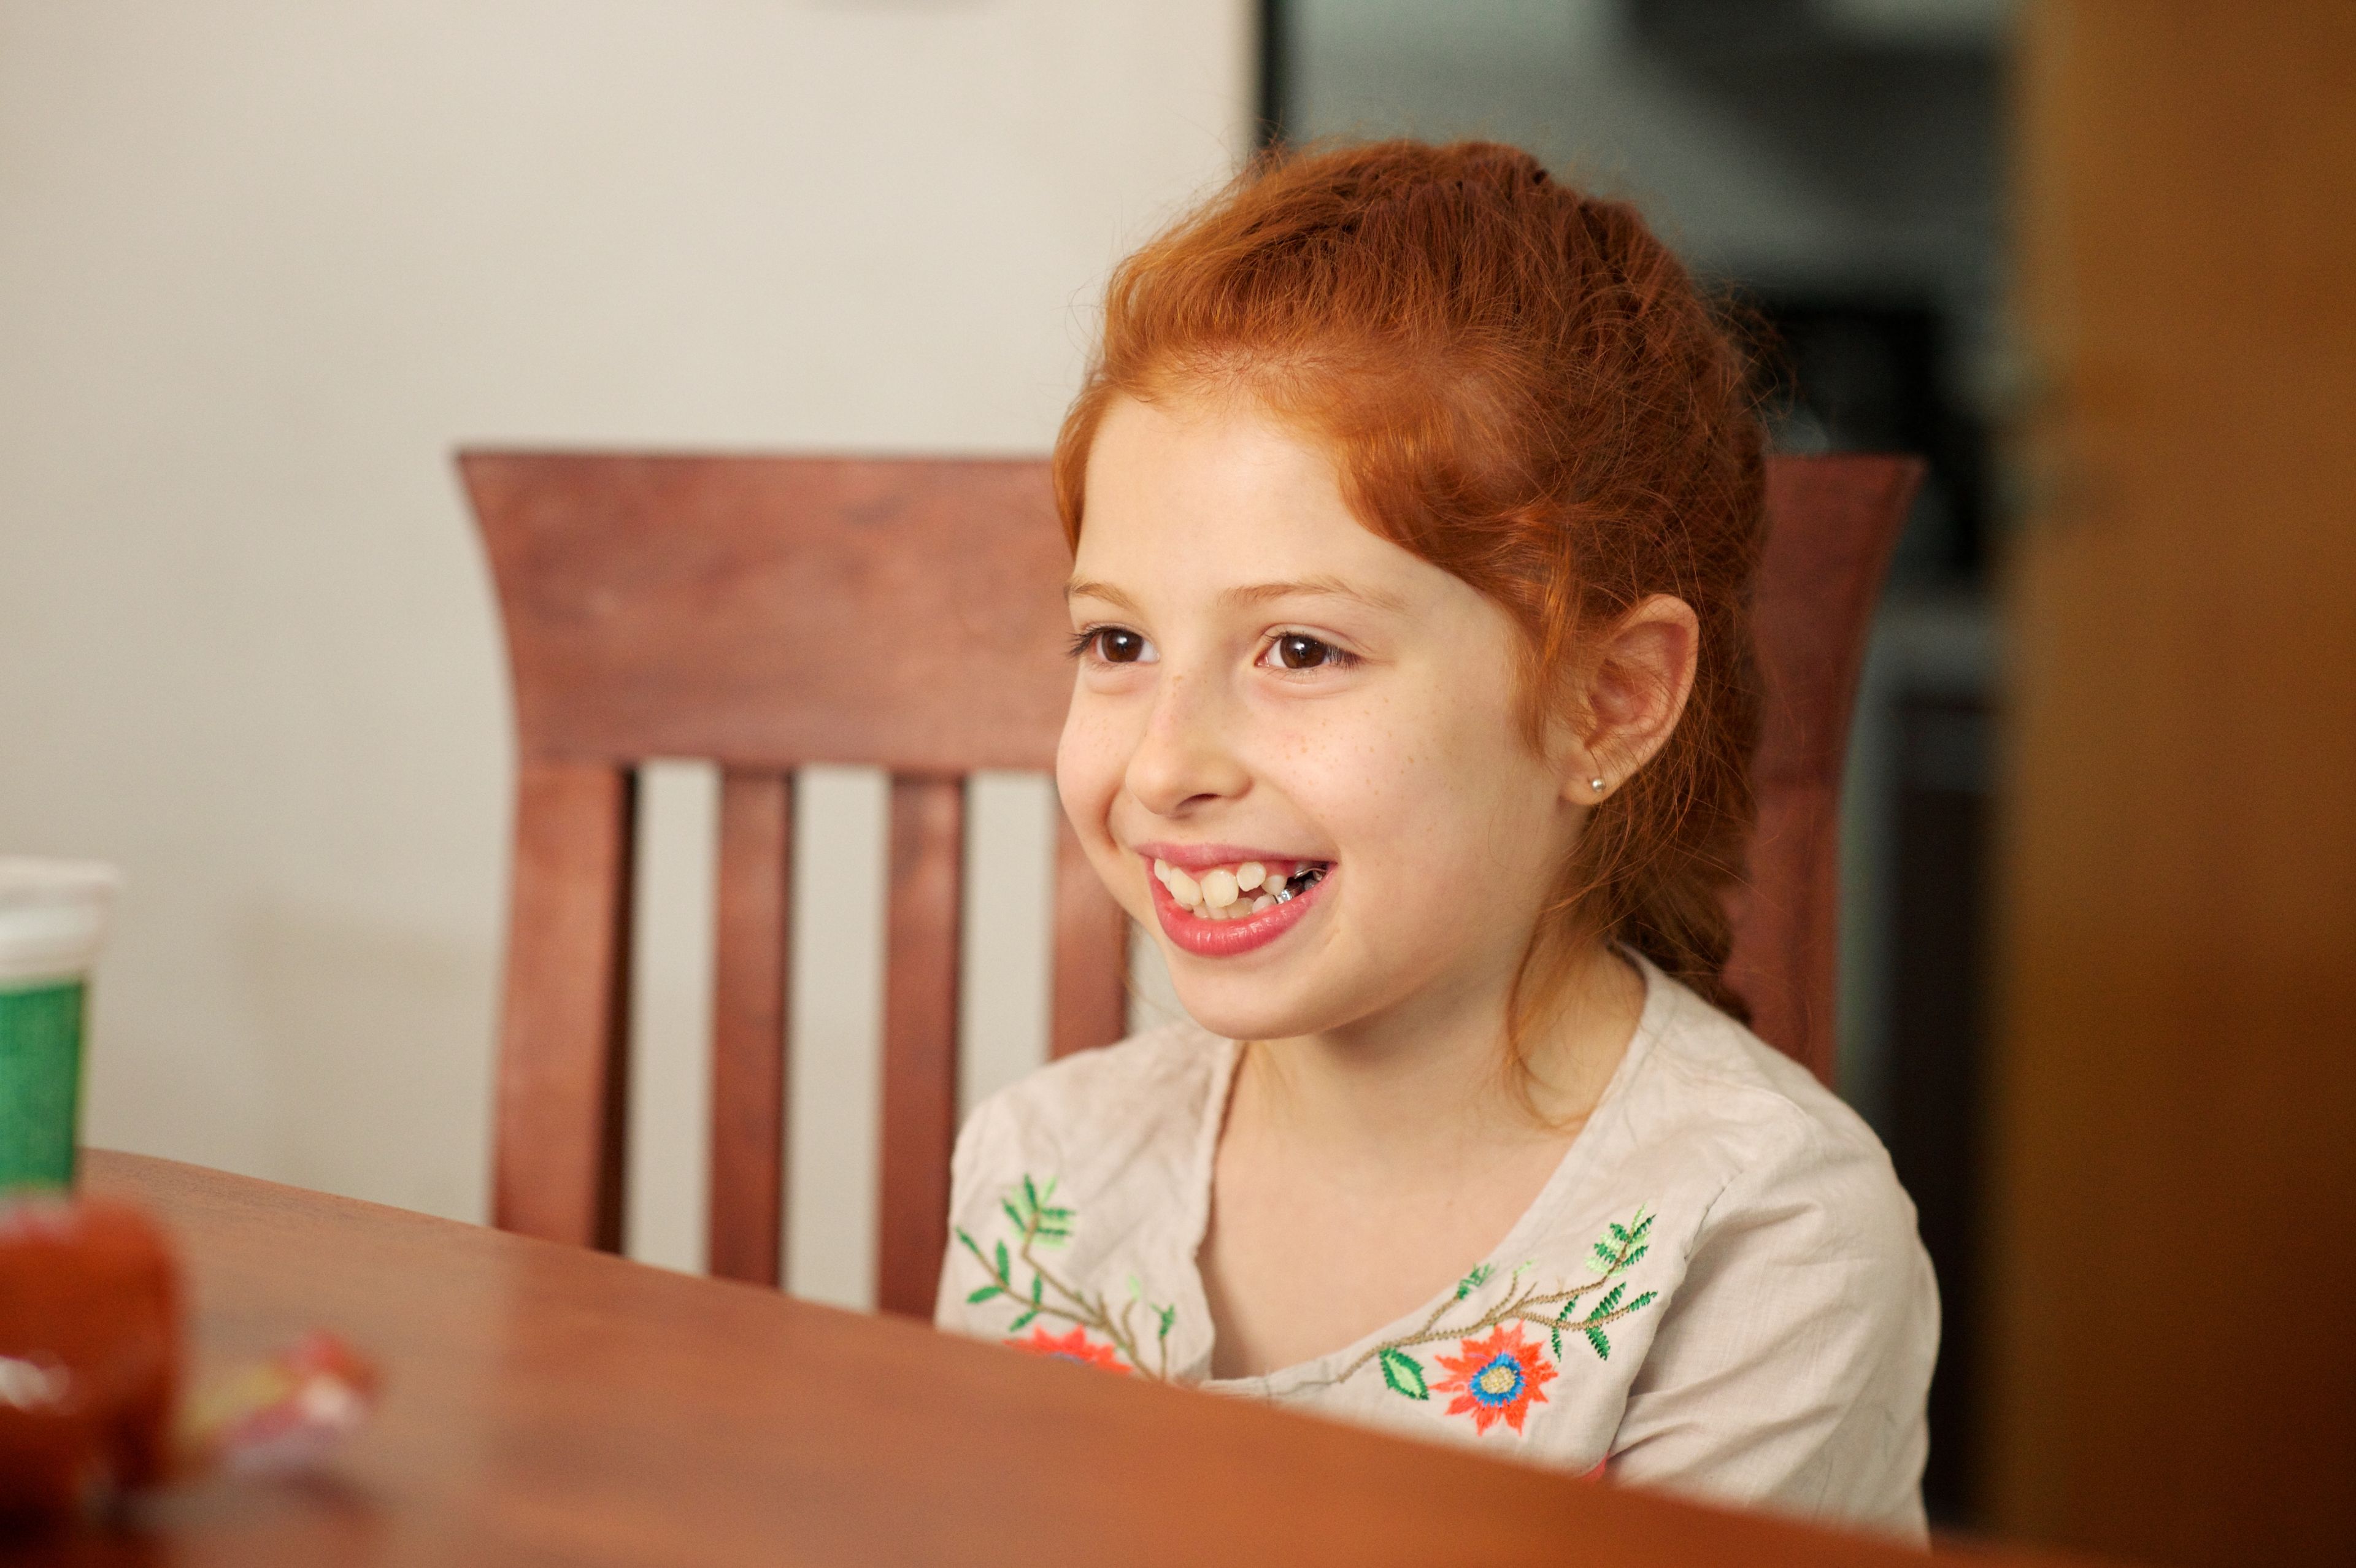 A young red-haired girl sitting at a table.